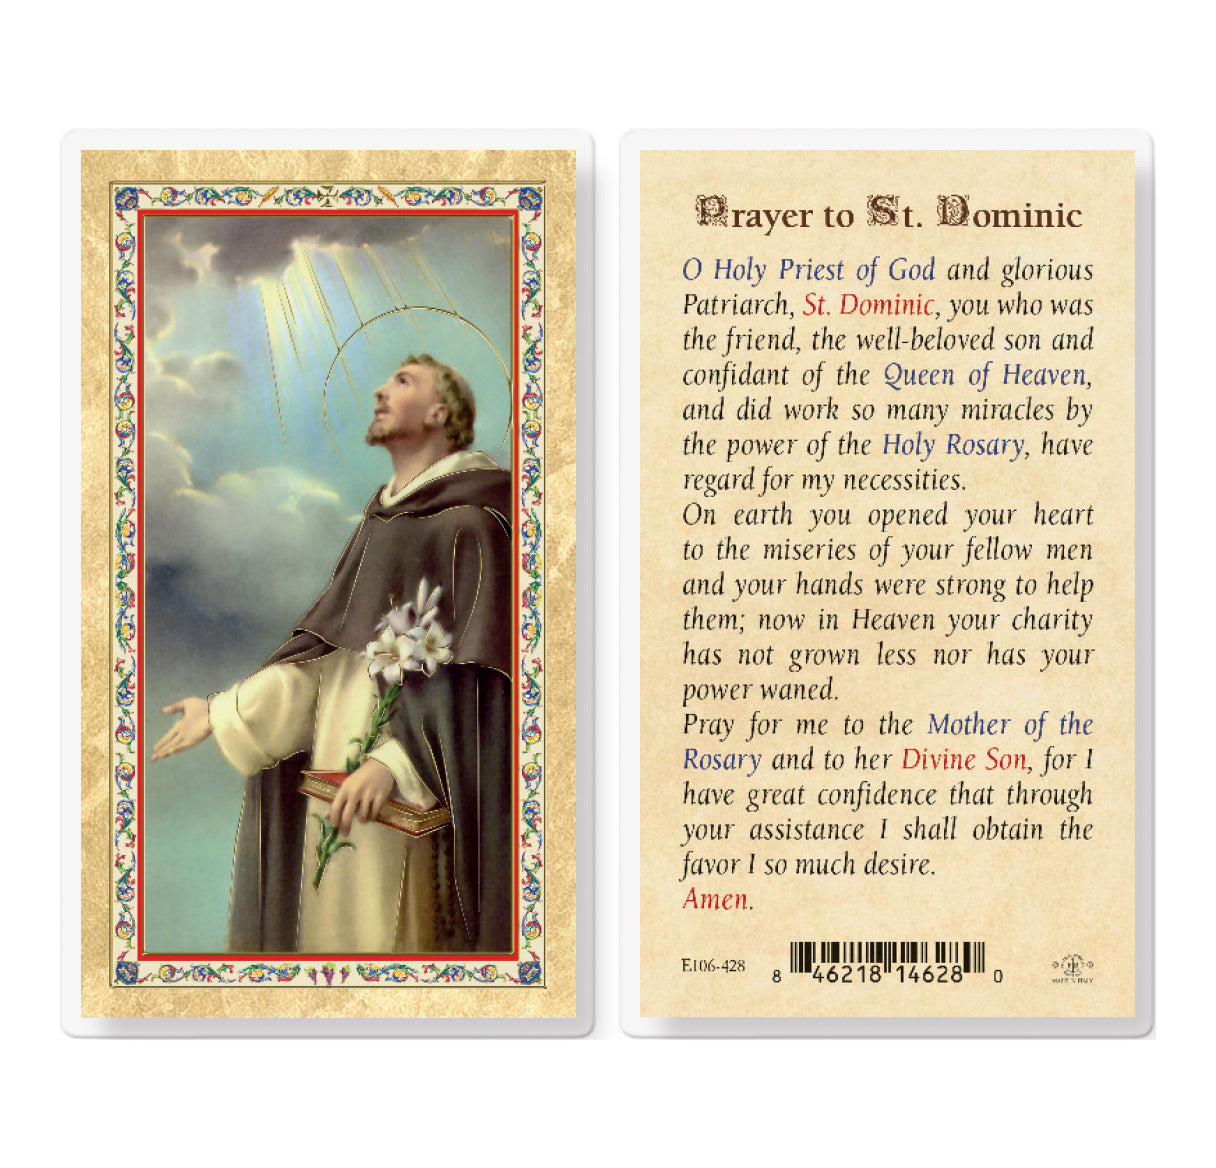 Prayer to St. Dominic Gold-Stamped Laminated Catholic Prayer Holy Card with Prayer on Back, Pack of 25